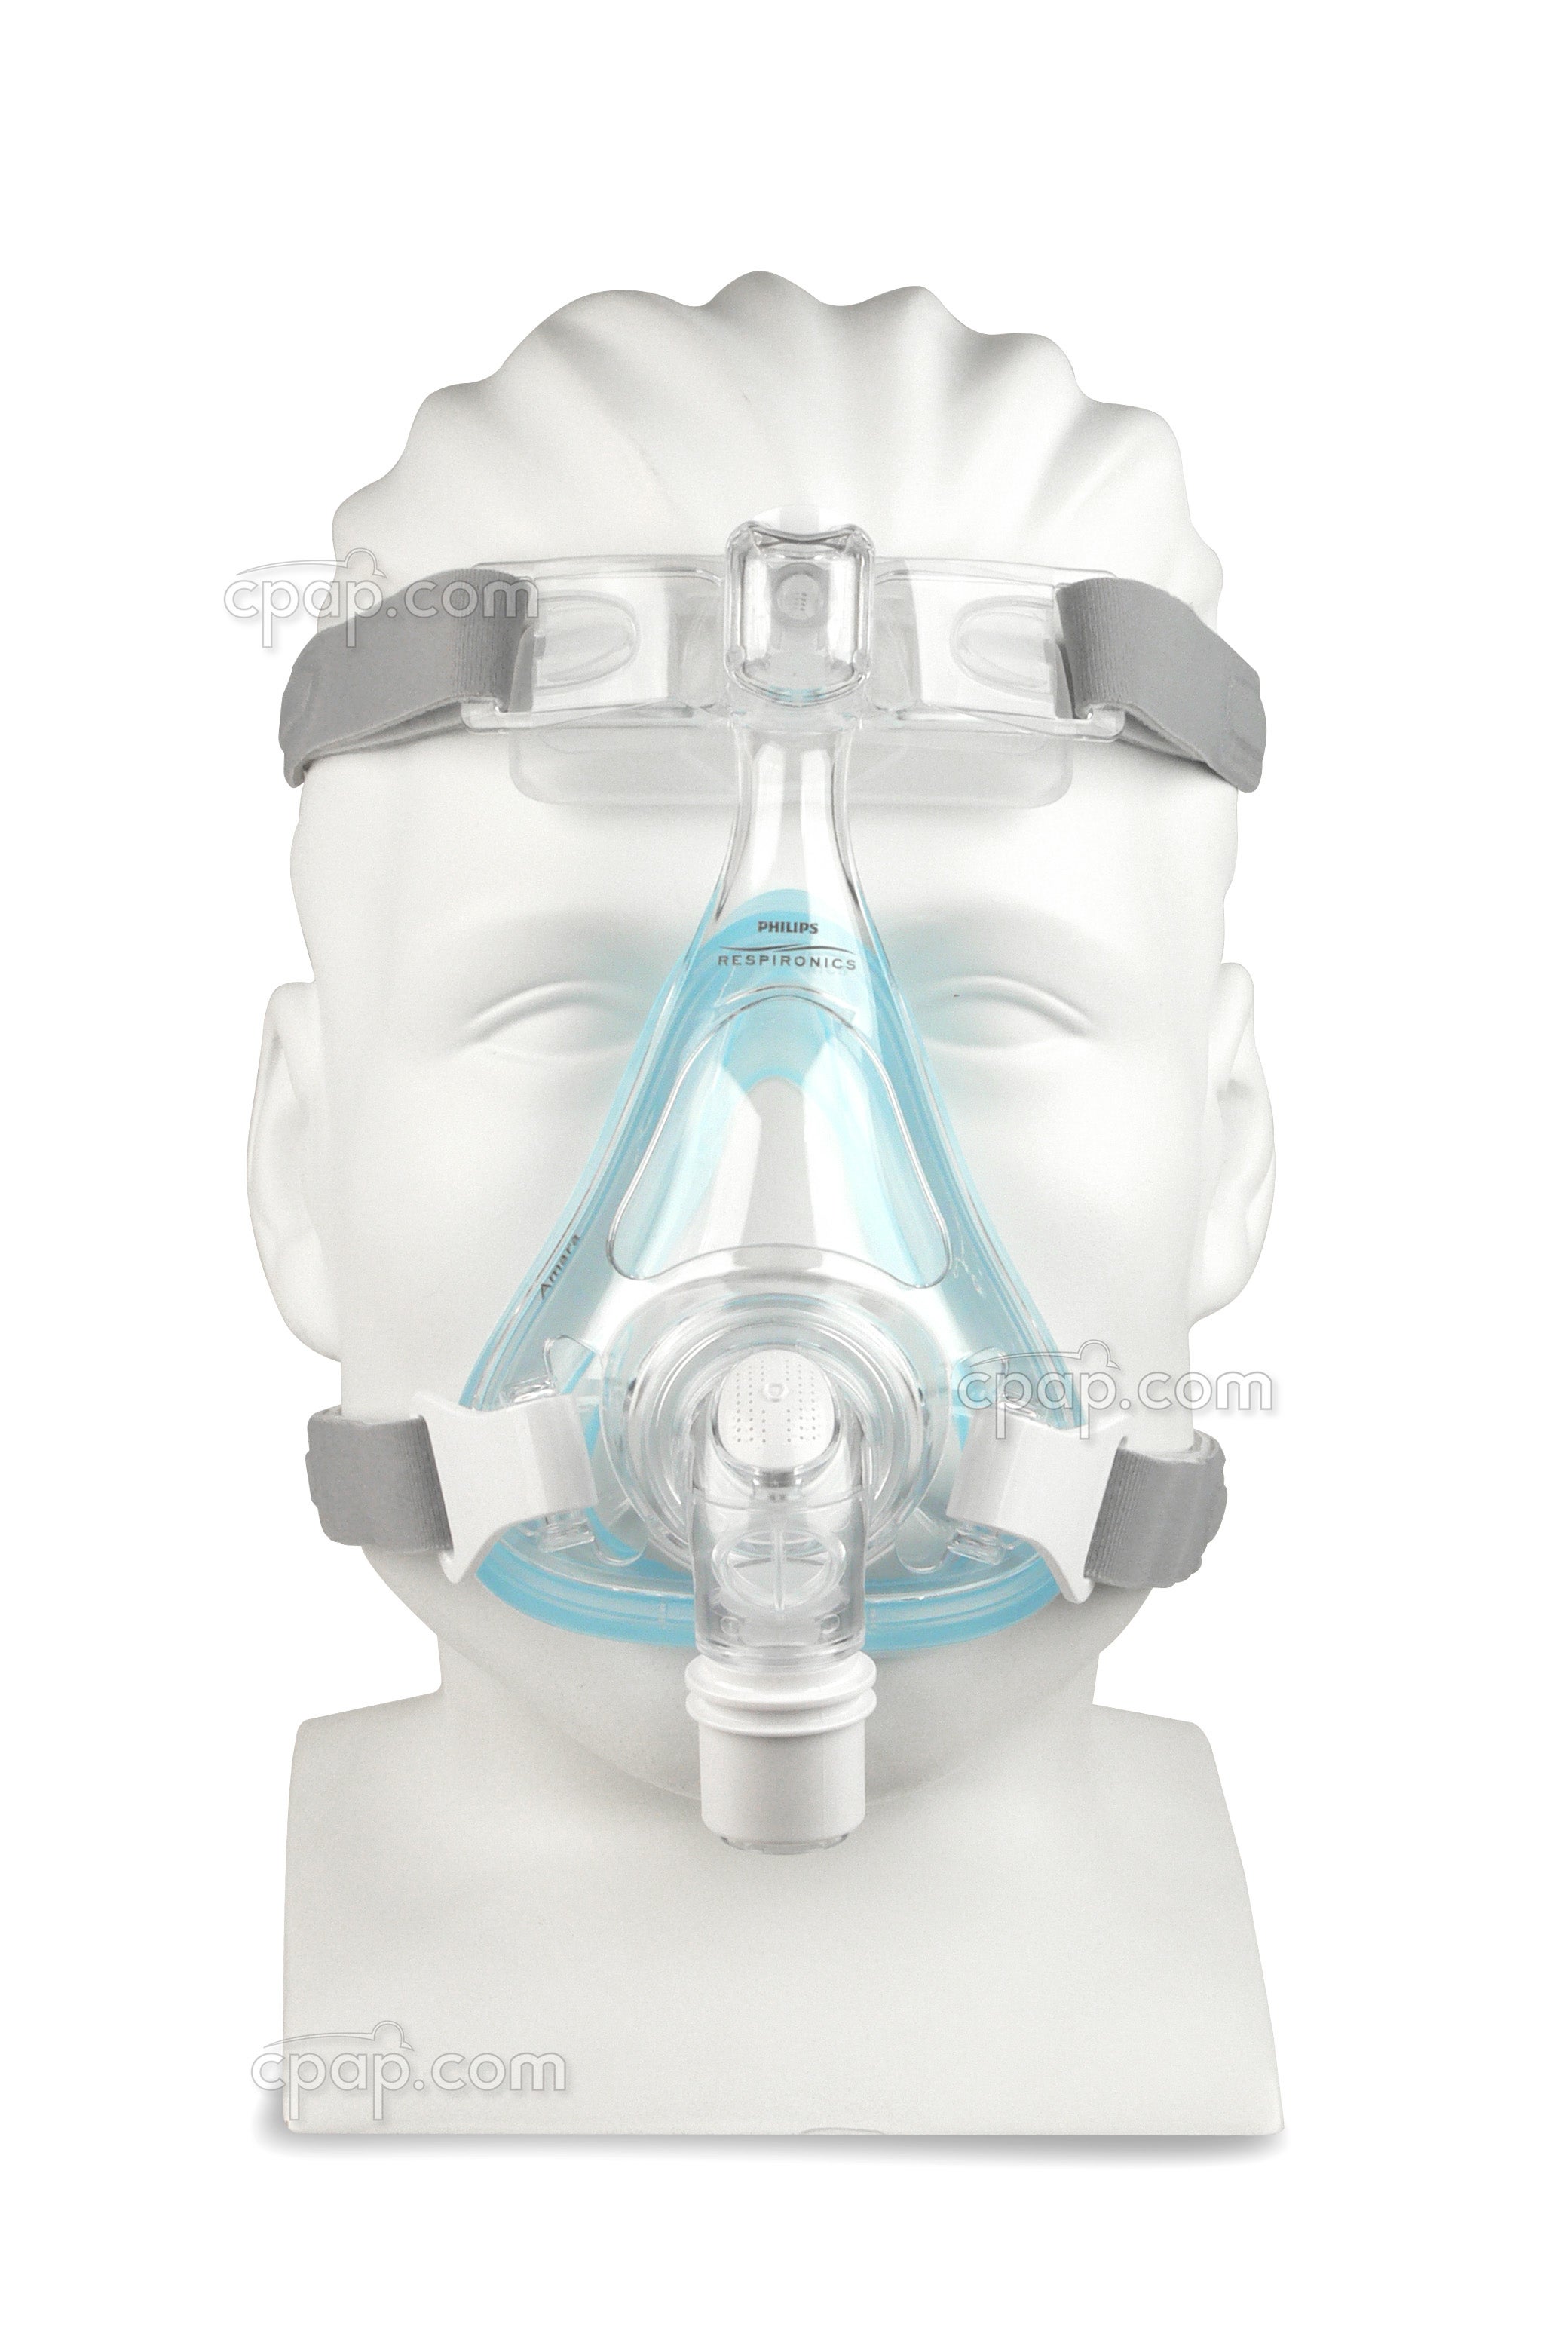 cpap silicone mask